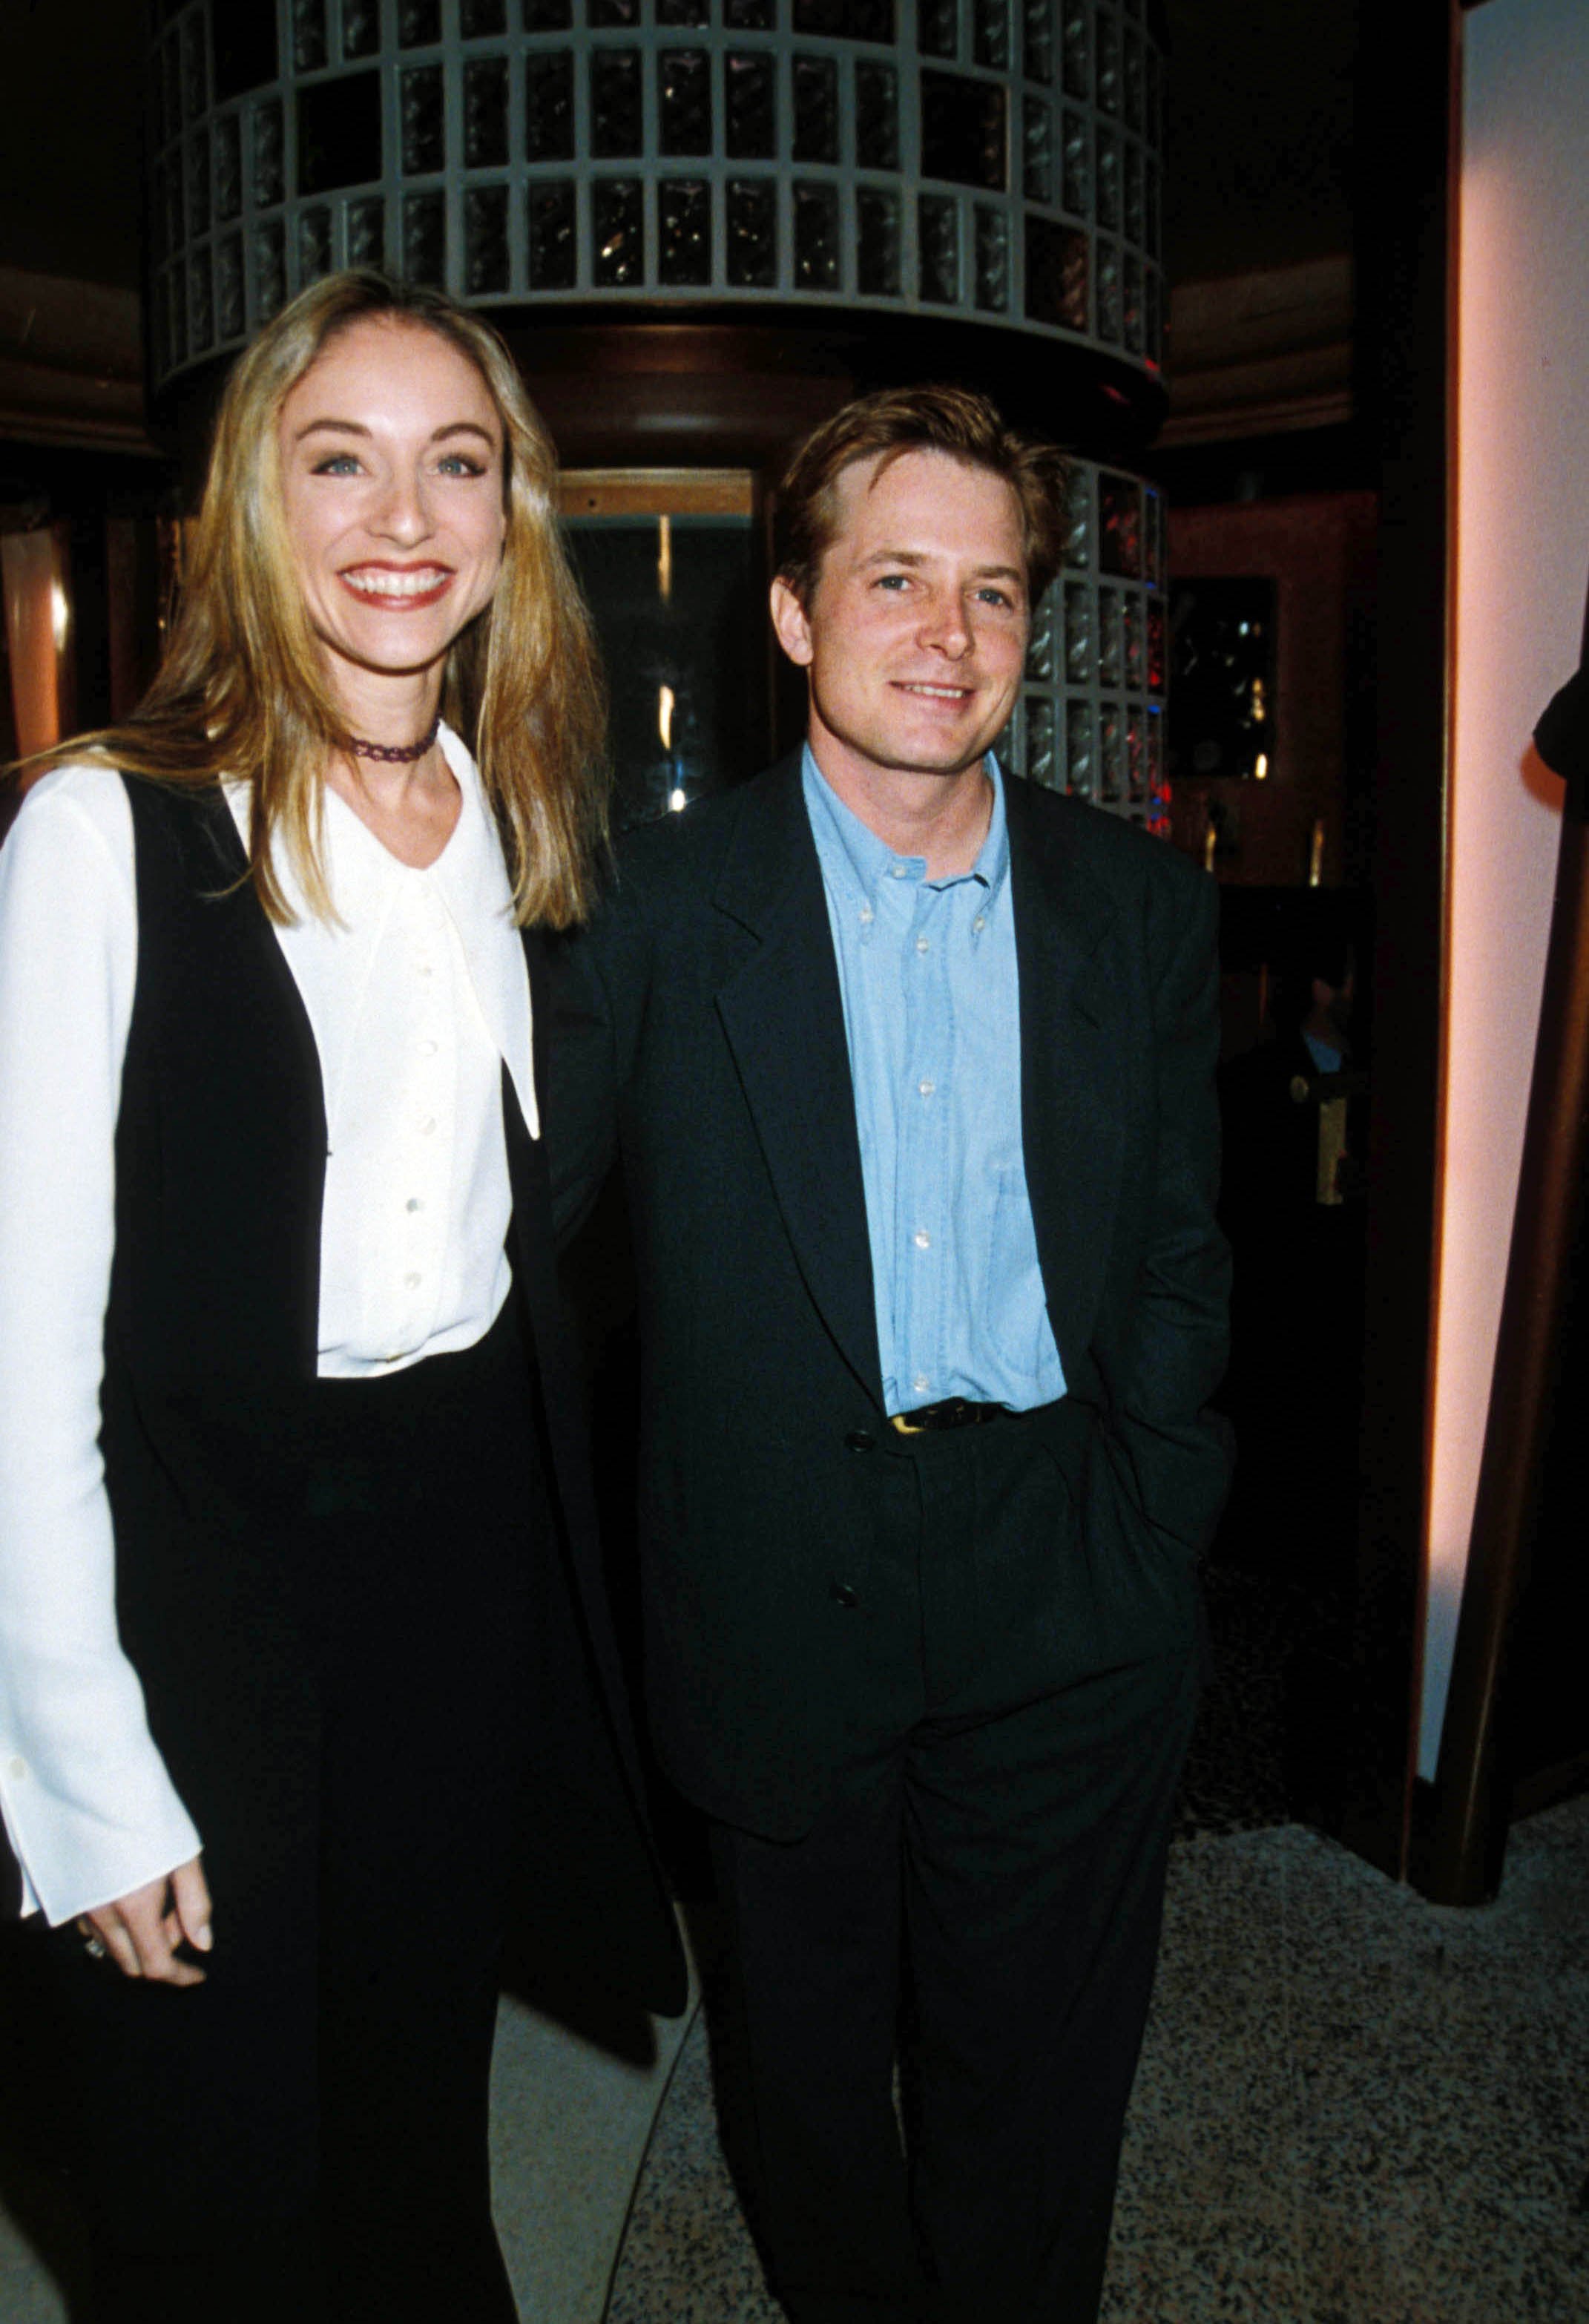 Michael J. Fox and wife Tracy Pollan at Planet Hollywood in London in 1991 | Photo: Getty Images